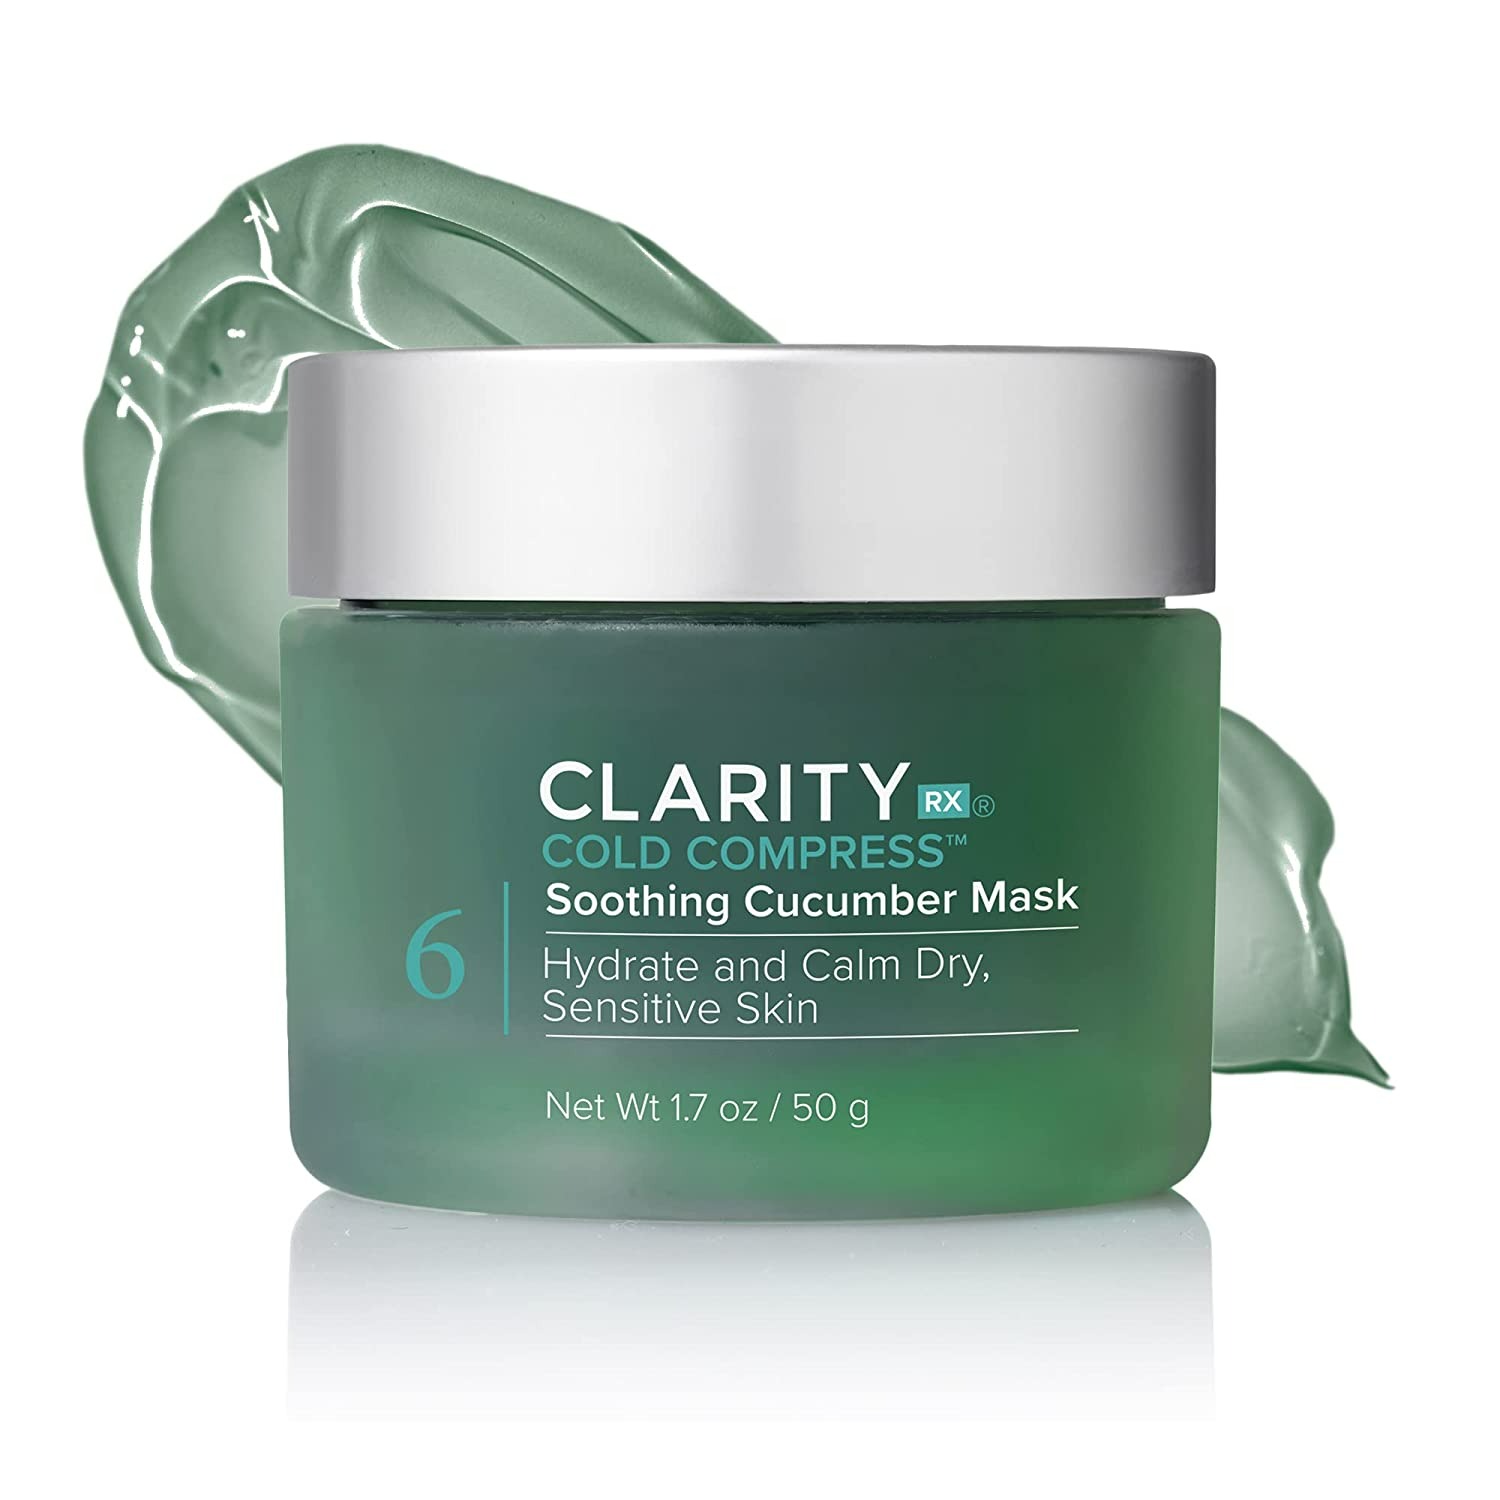 ClarityRx Cold Compress Soothing Cucumber Face Mask - 1.7 Oz